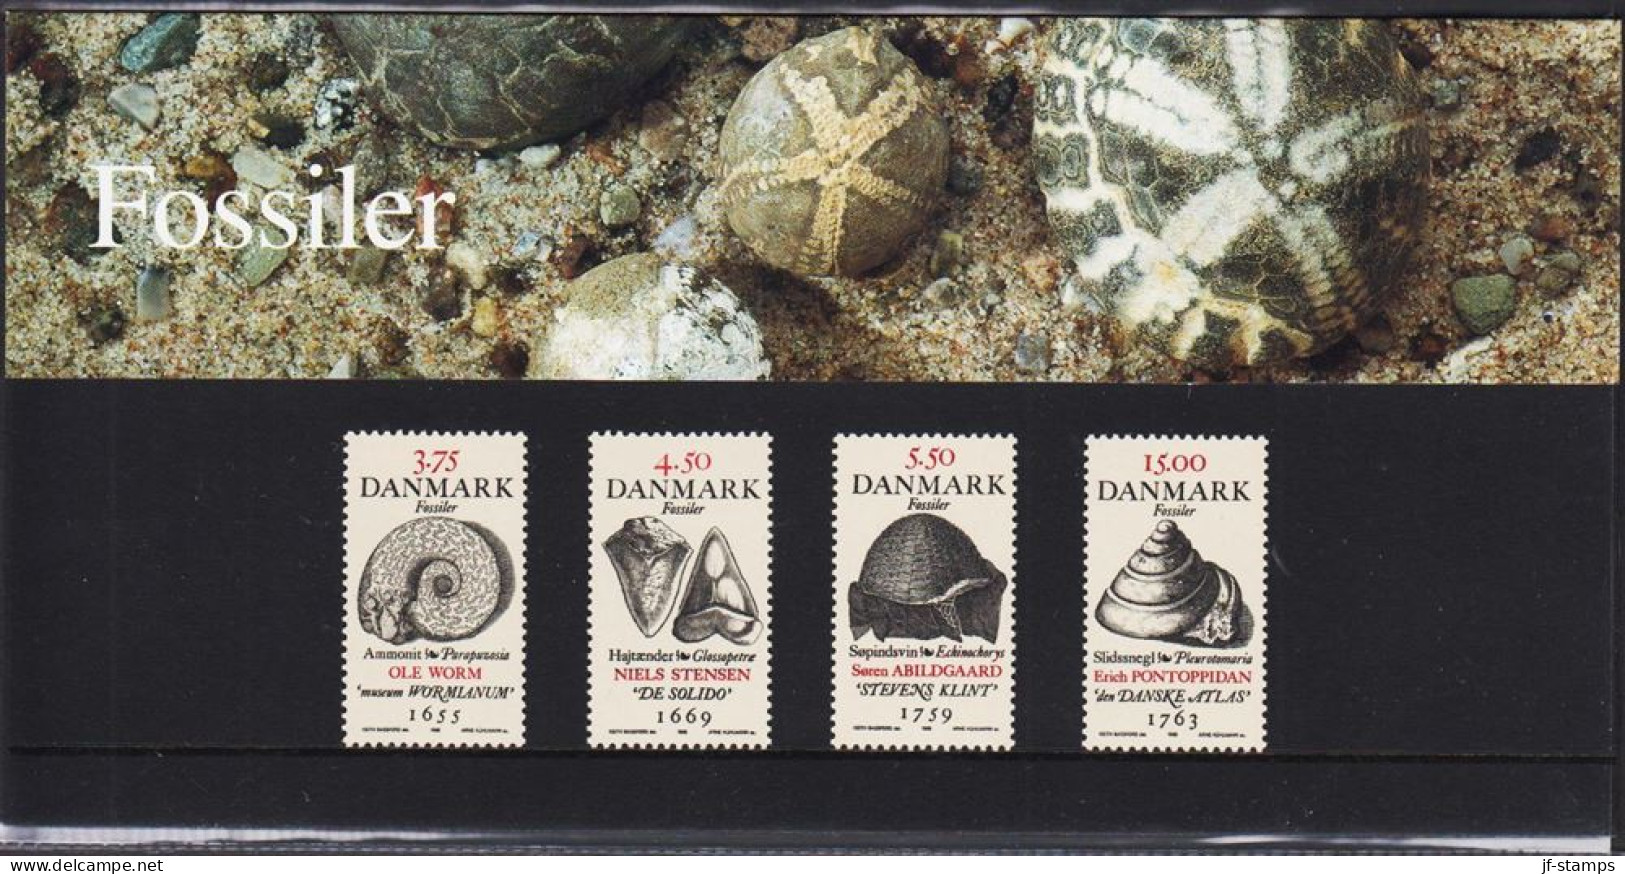 1998. DANMARK. Fossiler Complete Set In Official Folder (SM 32/1998) Never Hinged. (Michel 1195-1198) - JF544449 - Neufs